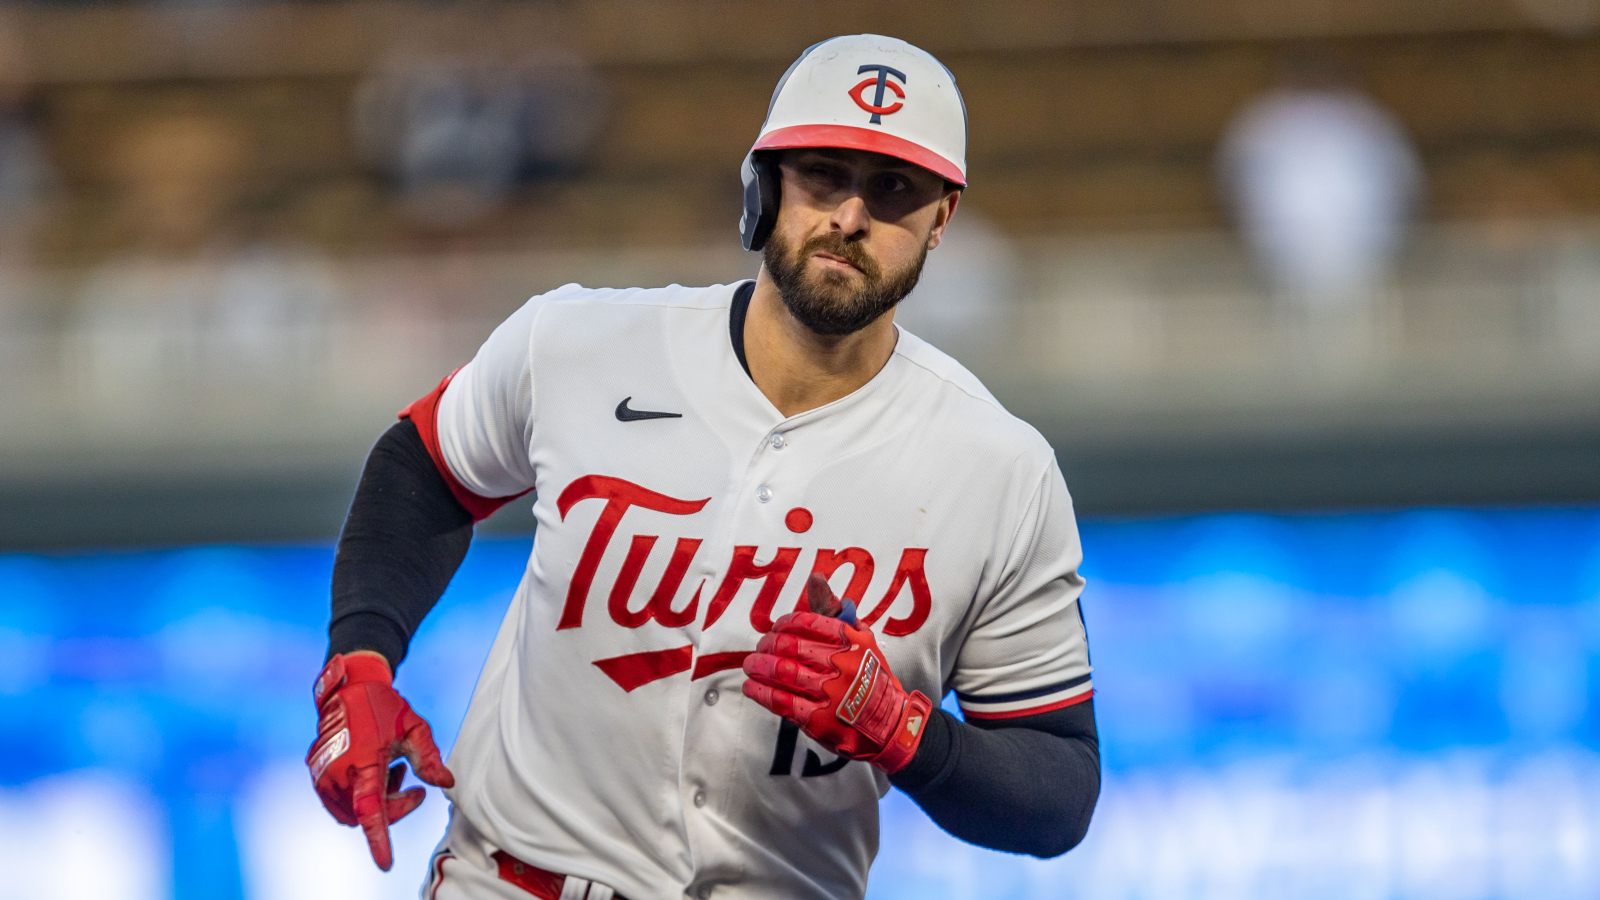 Bleeding Yankee Blue: WHY HECKLE JOEY GALLO? WHAT'S DONE IS DONE